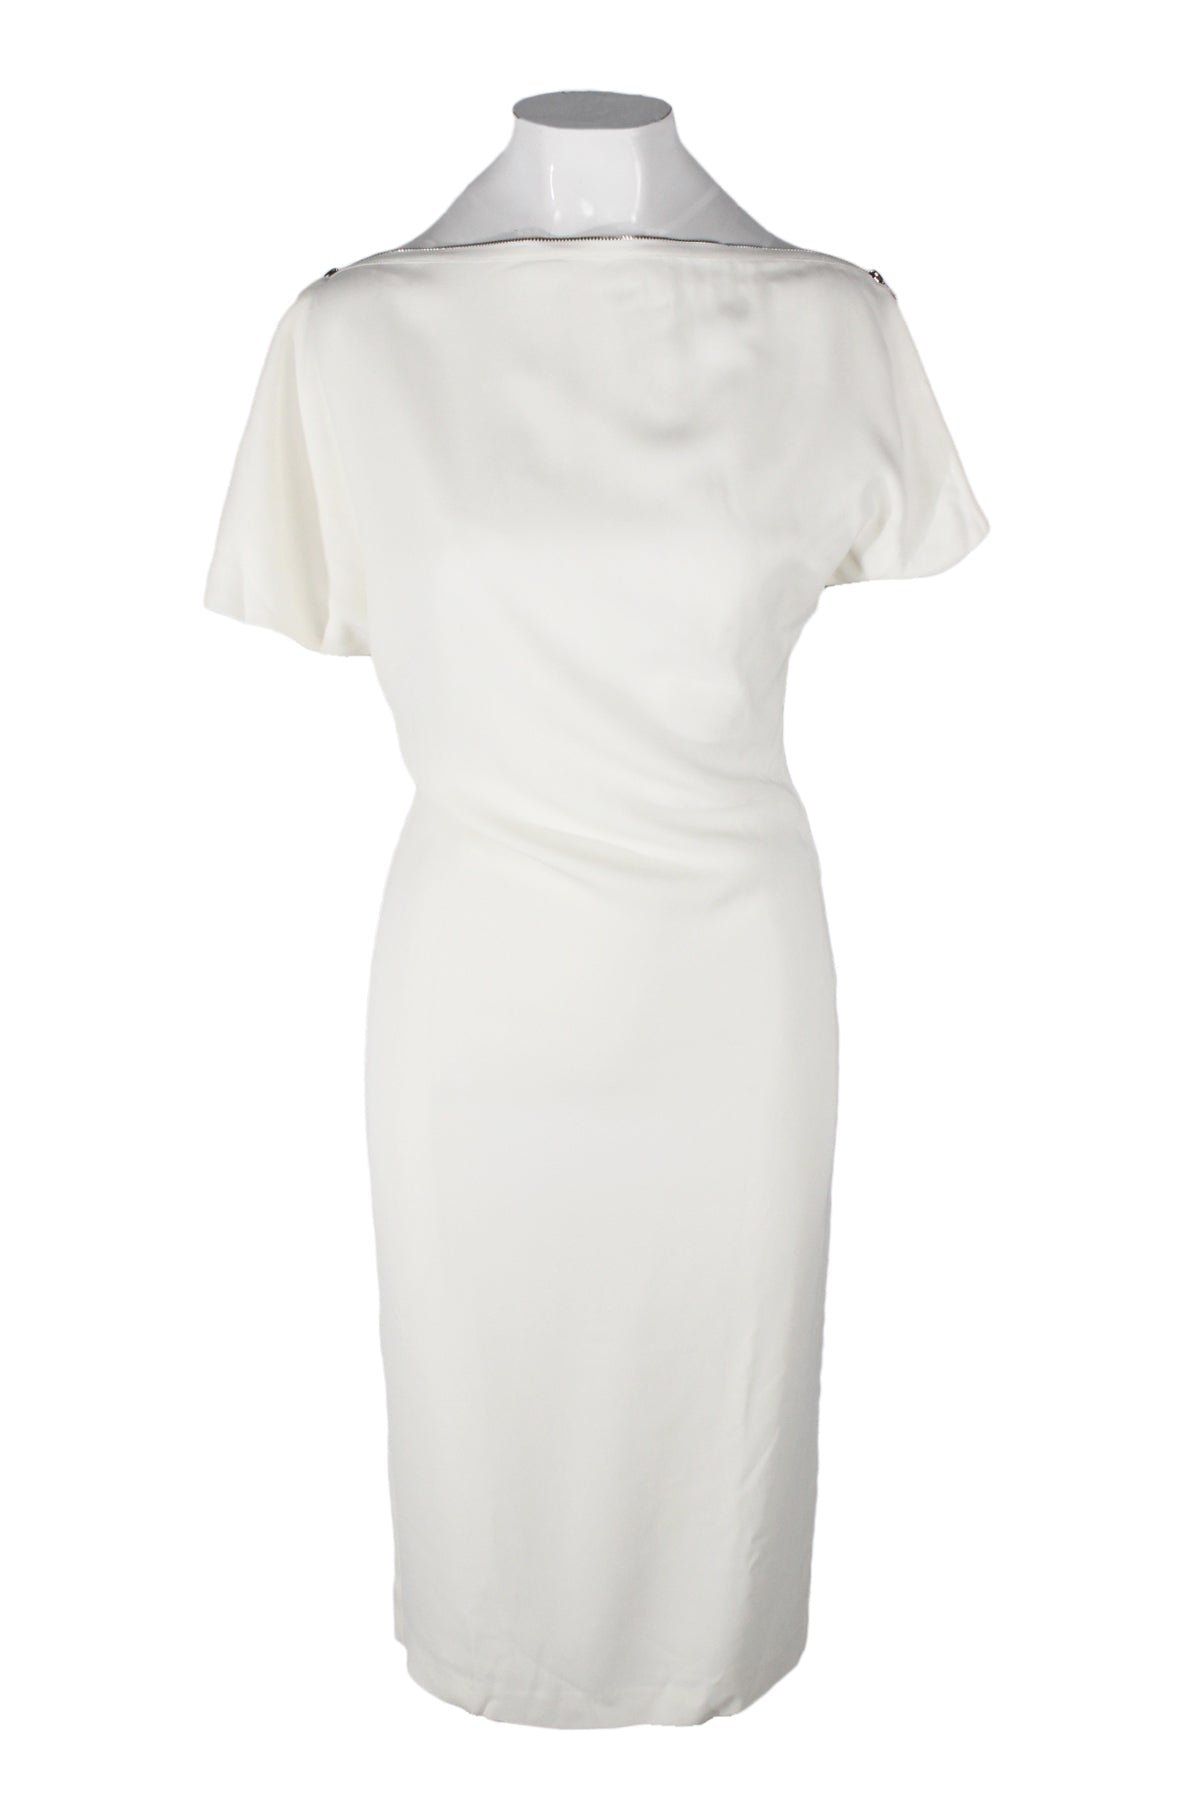 front of white dress displayed on full mannequin